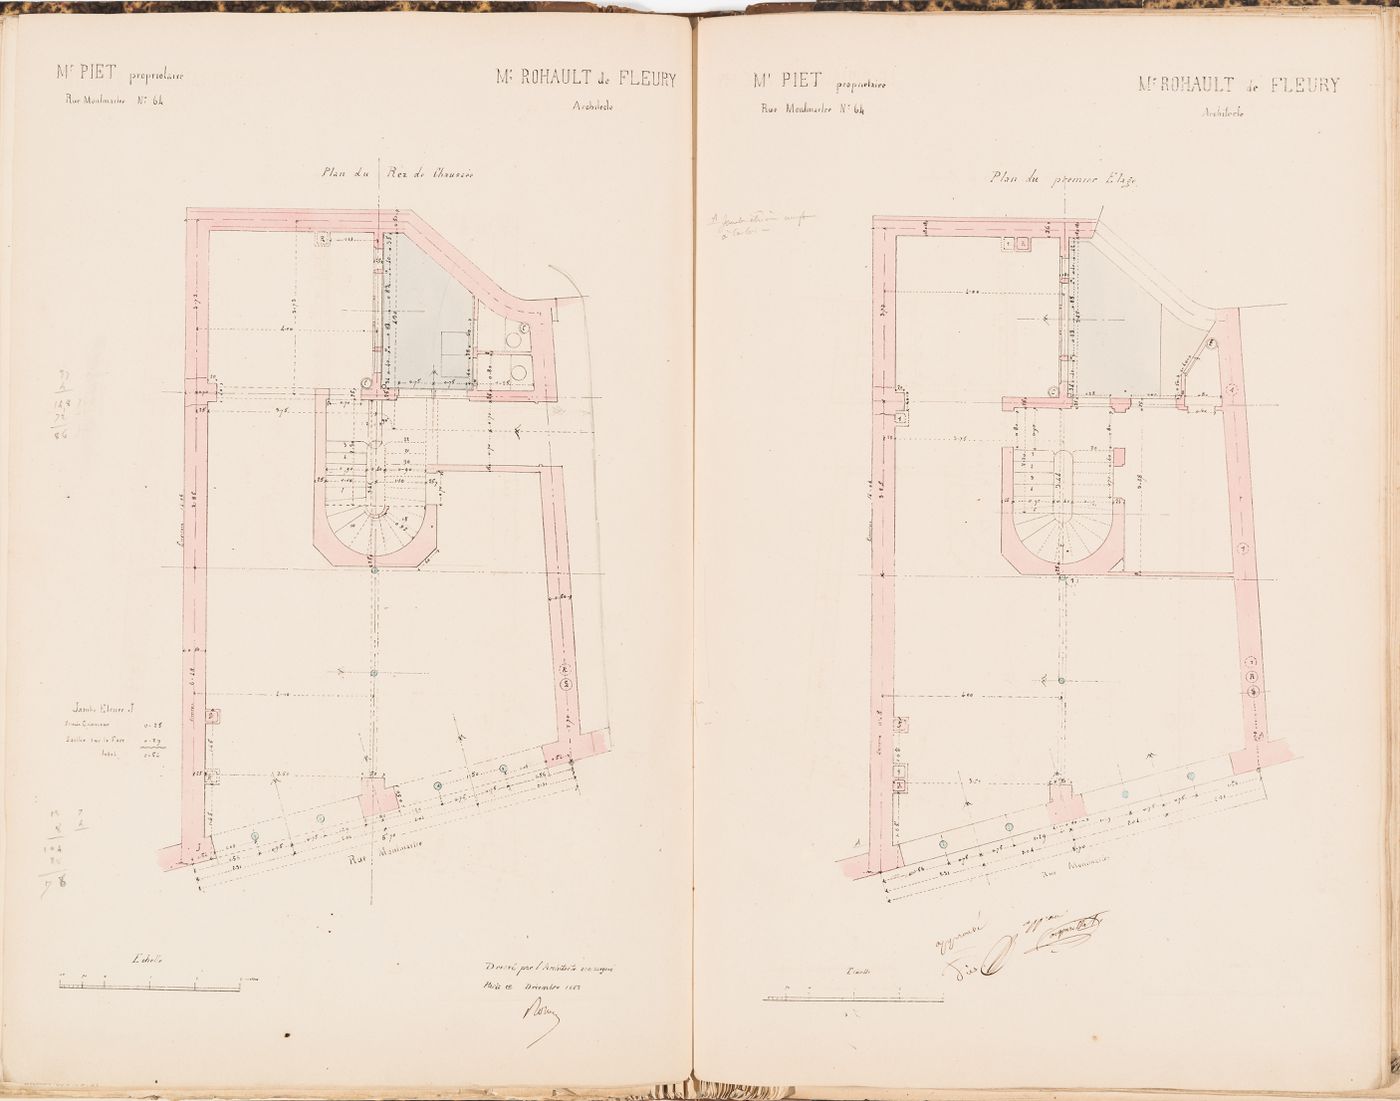 Contract drawing for an apartment house for Monsieur Piet, 64 rue Montmartre, Paris: Ground and first floor plans